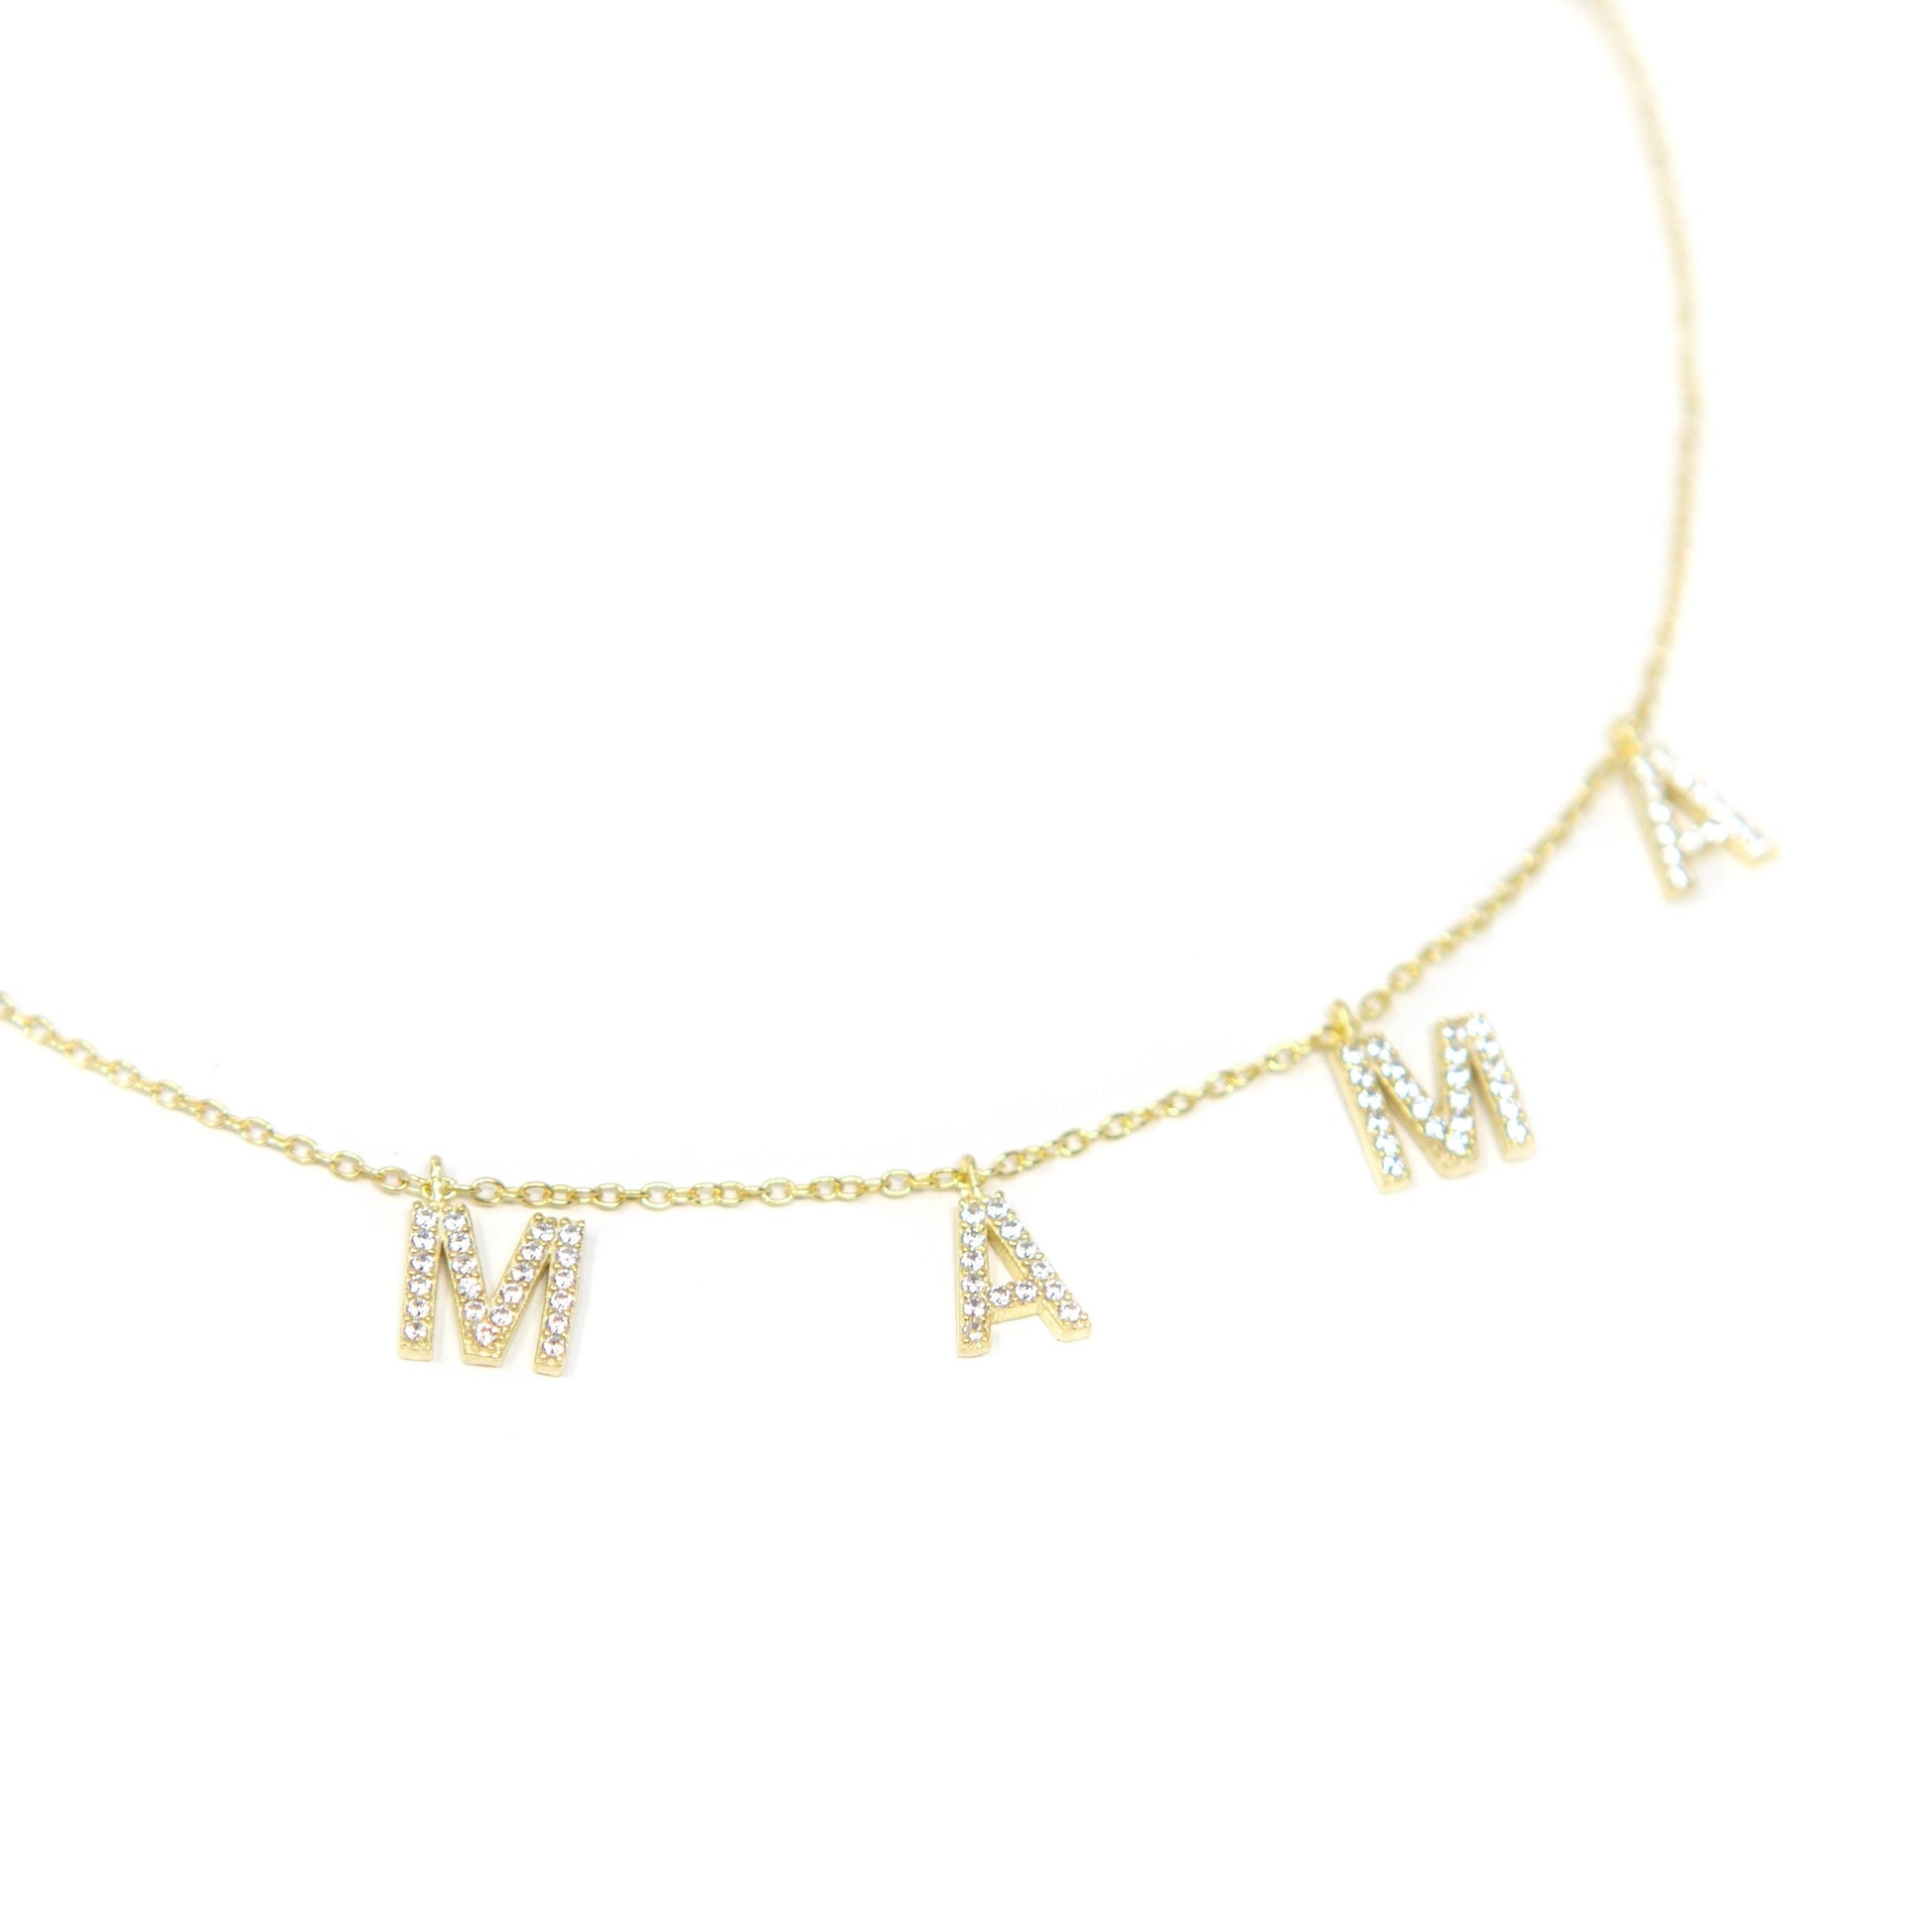 It’s All in a Name™ MAMA Necklace JEWELRY The Sis Kiss Gold with Crystals